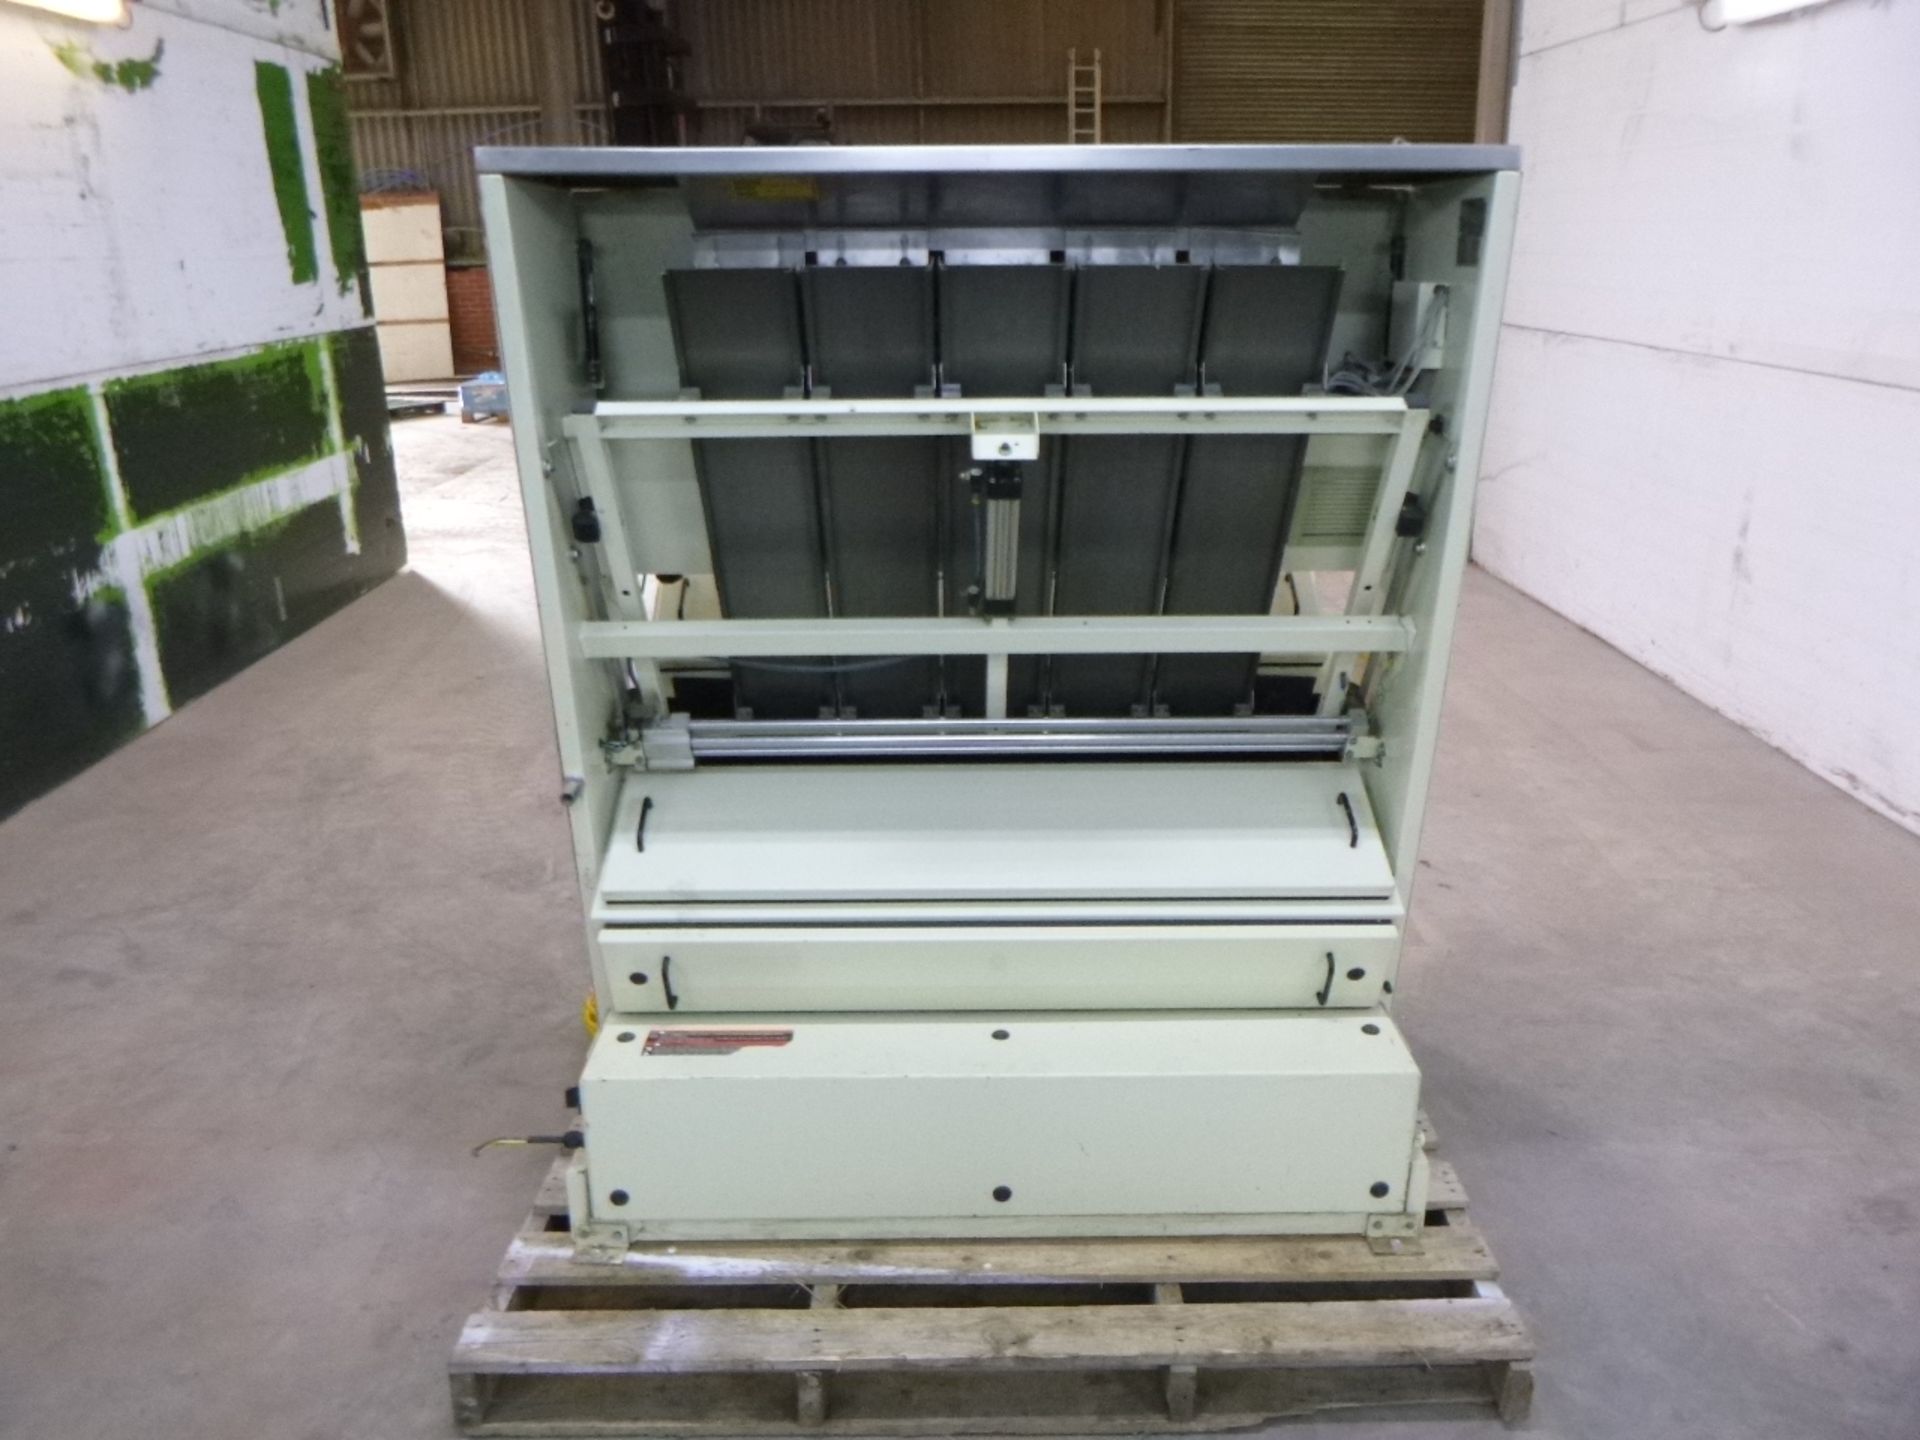 Satake AS 160967 Alpha Scan Colour Sorter, year of manufacture 2007, 1700 watts, 220V (vendors - Image 4 of 11